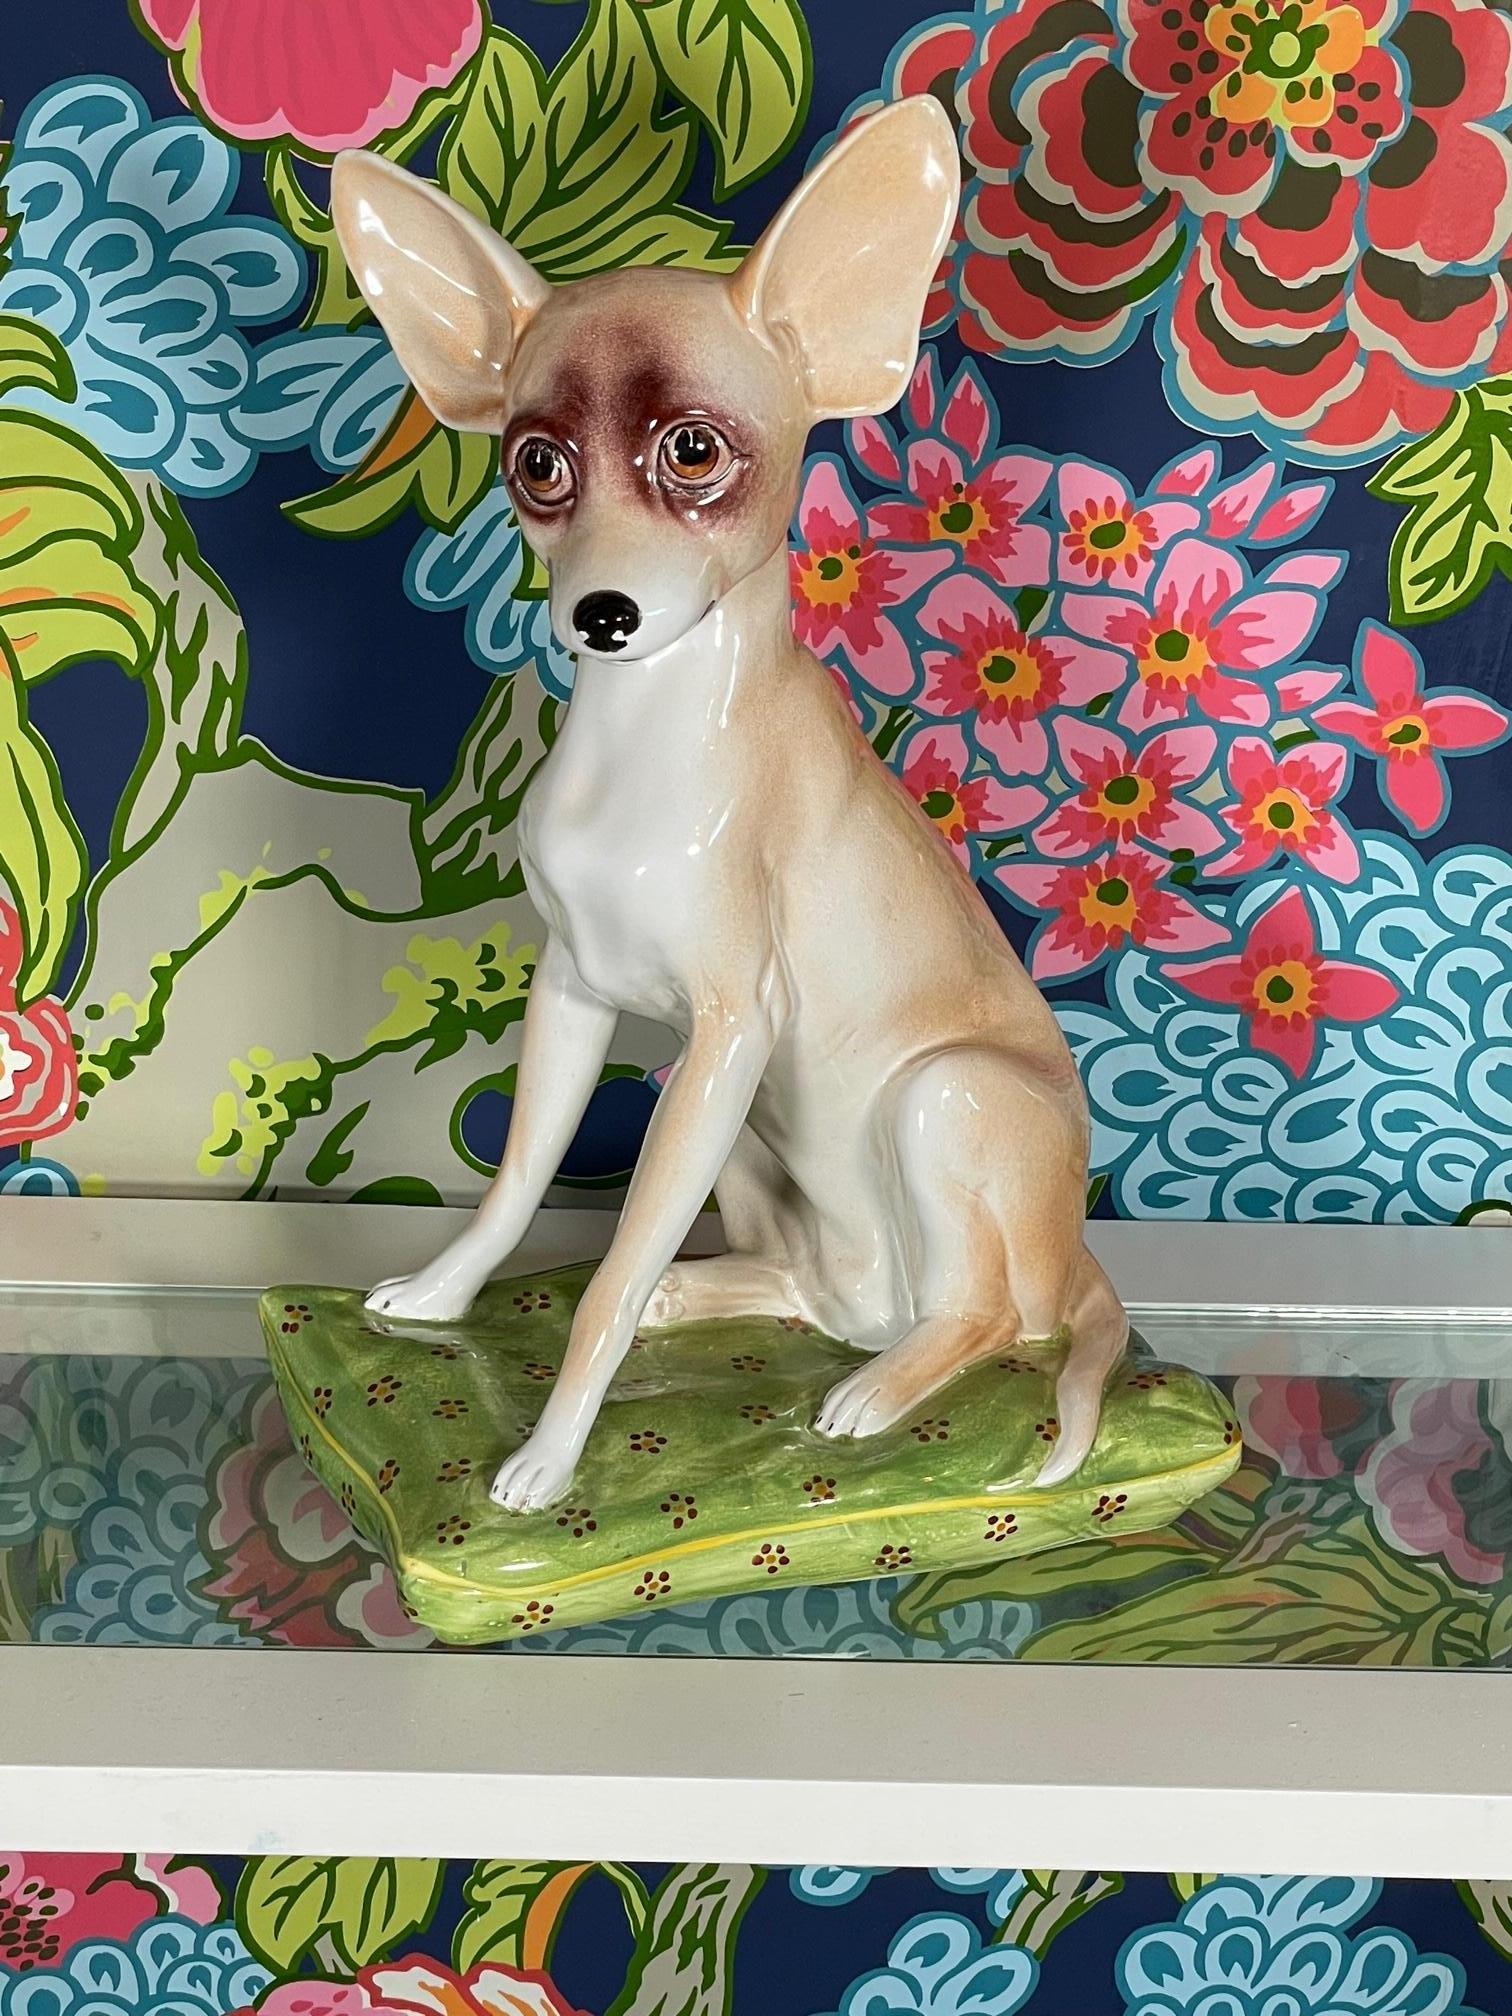 Vintage Italian ceramic dog figurine features our cute long-eared friend sitting atop a comfy pillow. Ready to enhance the decor of his new home. Good condition with only minor imperfections consistent with age (see photos).

    